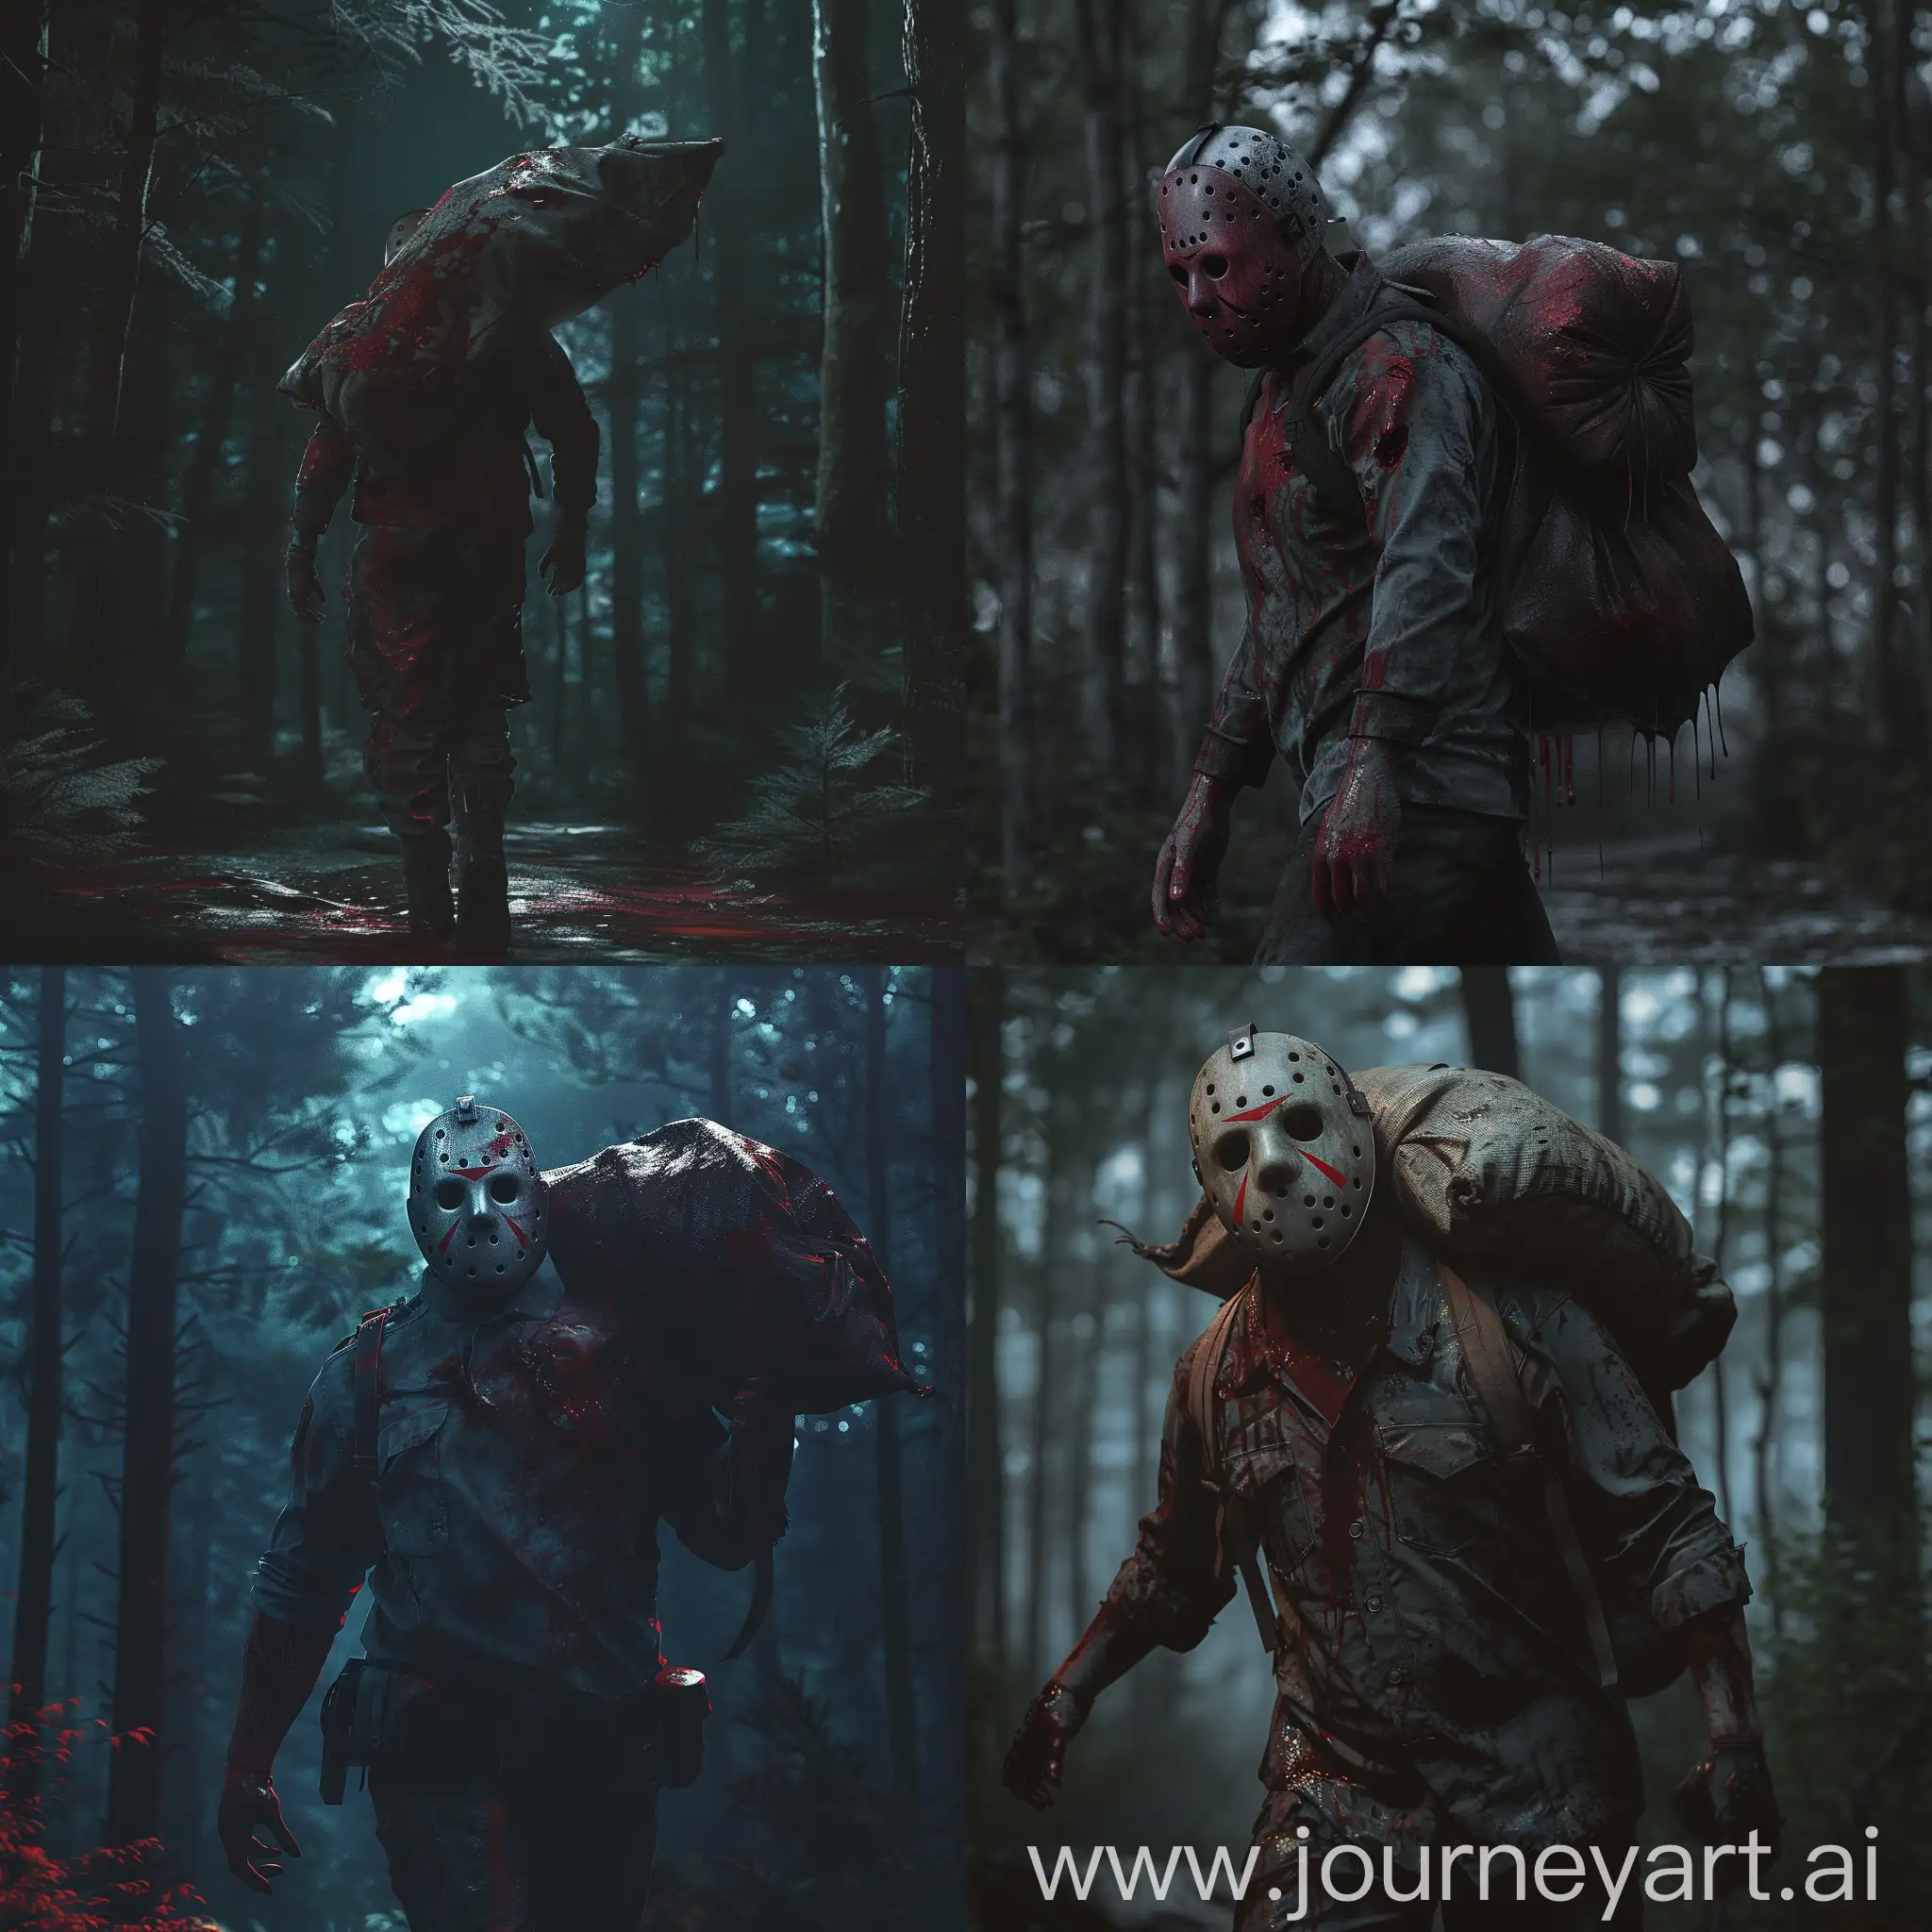 Jason Voorhees carrying a bloody sack on his shoulder in a dark forest. Cinematic shot. Photorealism.